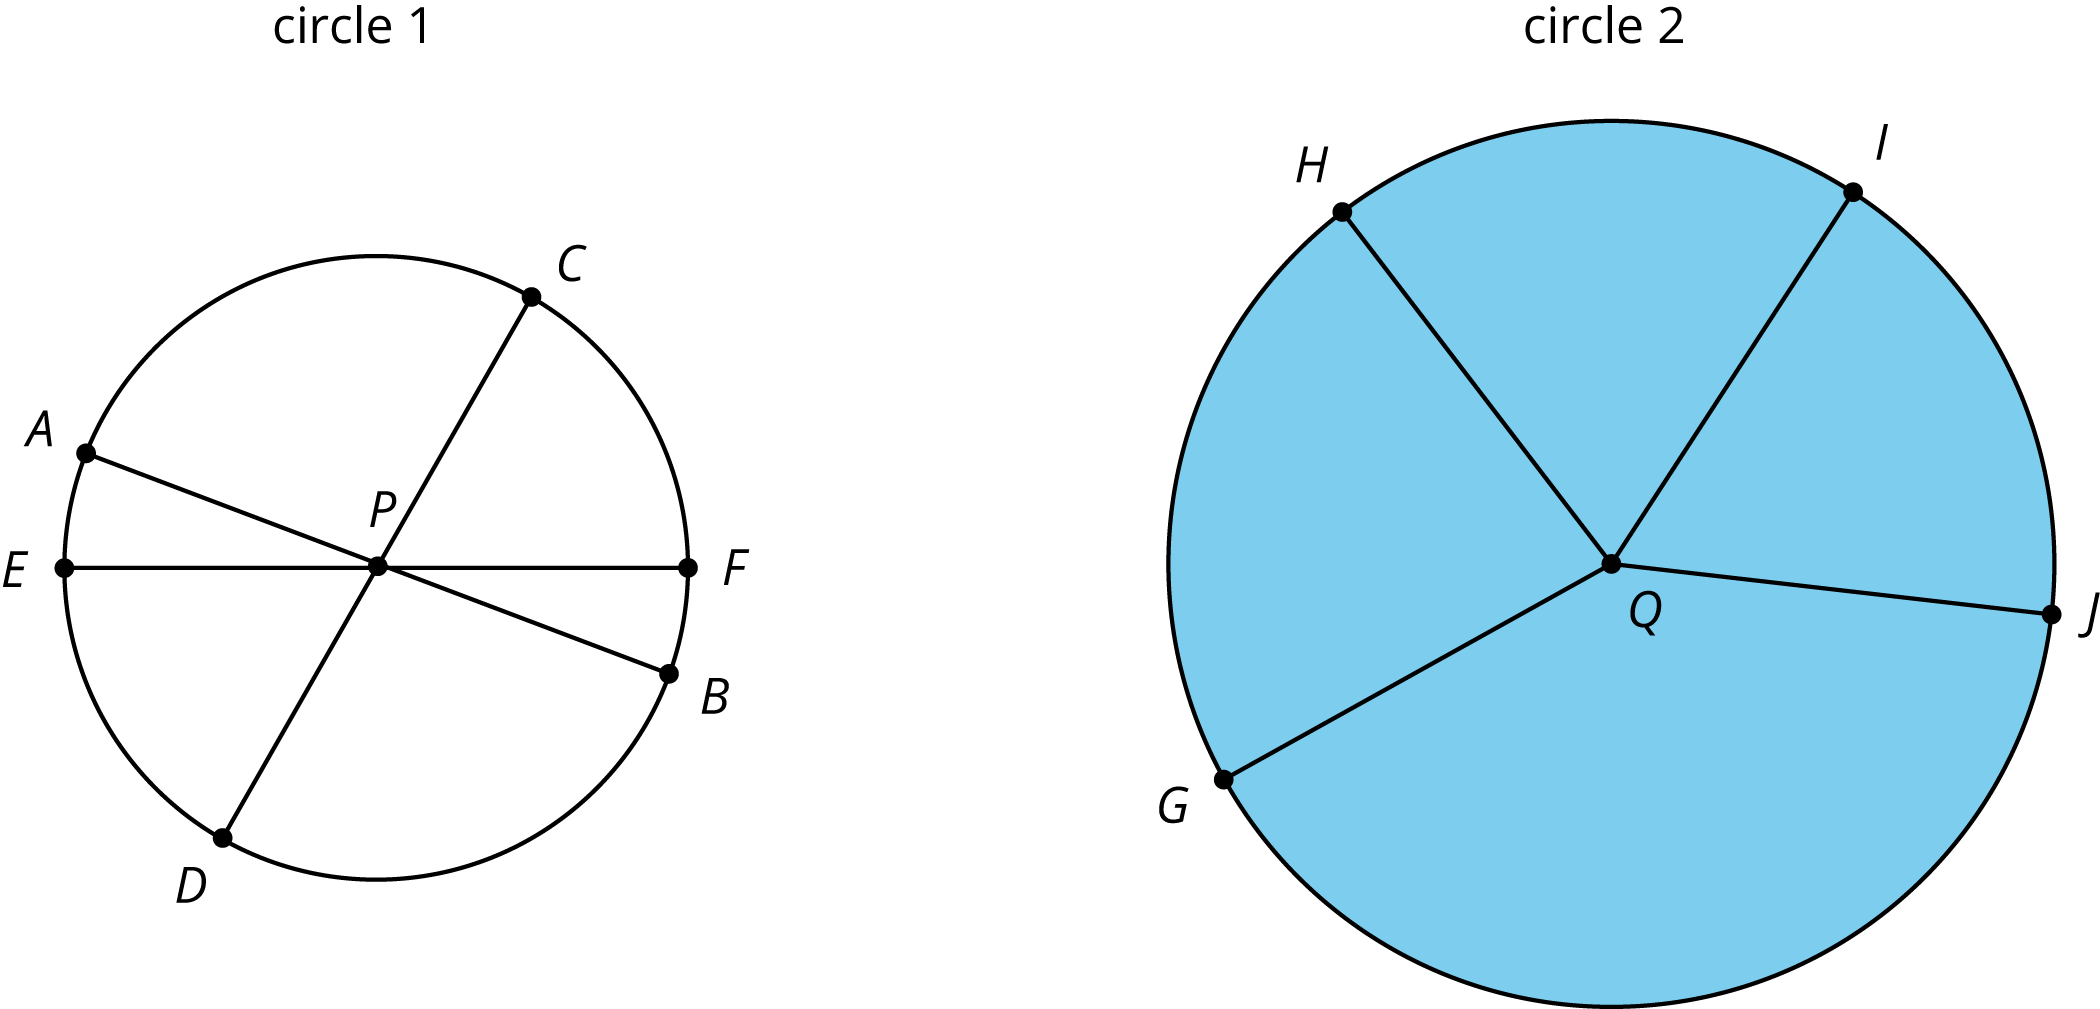 Two circles labeled circle 1 and circle 2. Circle 1 has a center at P and the points A, C, F, B, D, and E lie on the circle. Diameters A B, C D, and E F are drawn.  Circle 2 has a center at Q and the points G, H, I and J lie on the circle. Line segments Q G, Q H, Q I, and Q J are drawn.